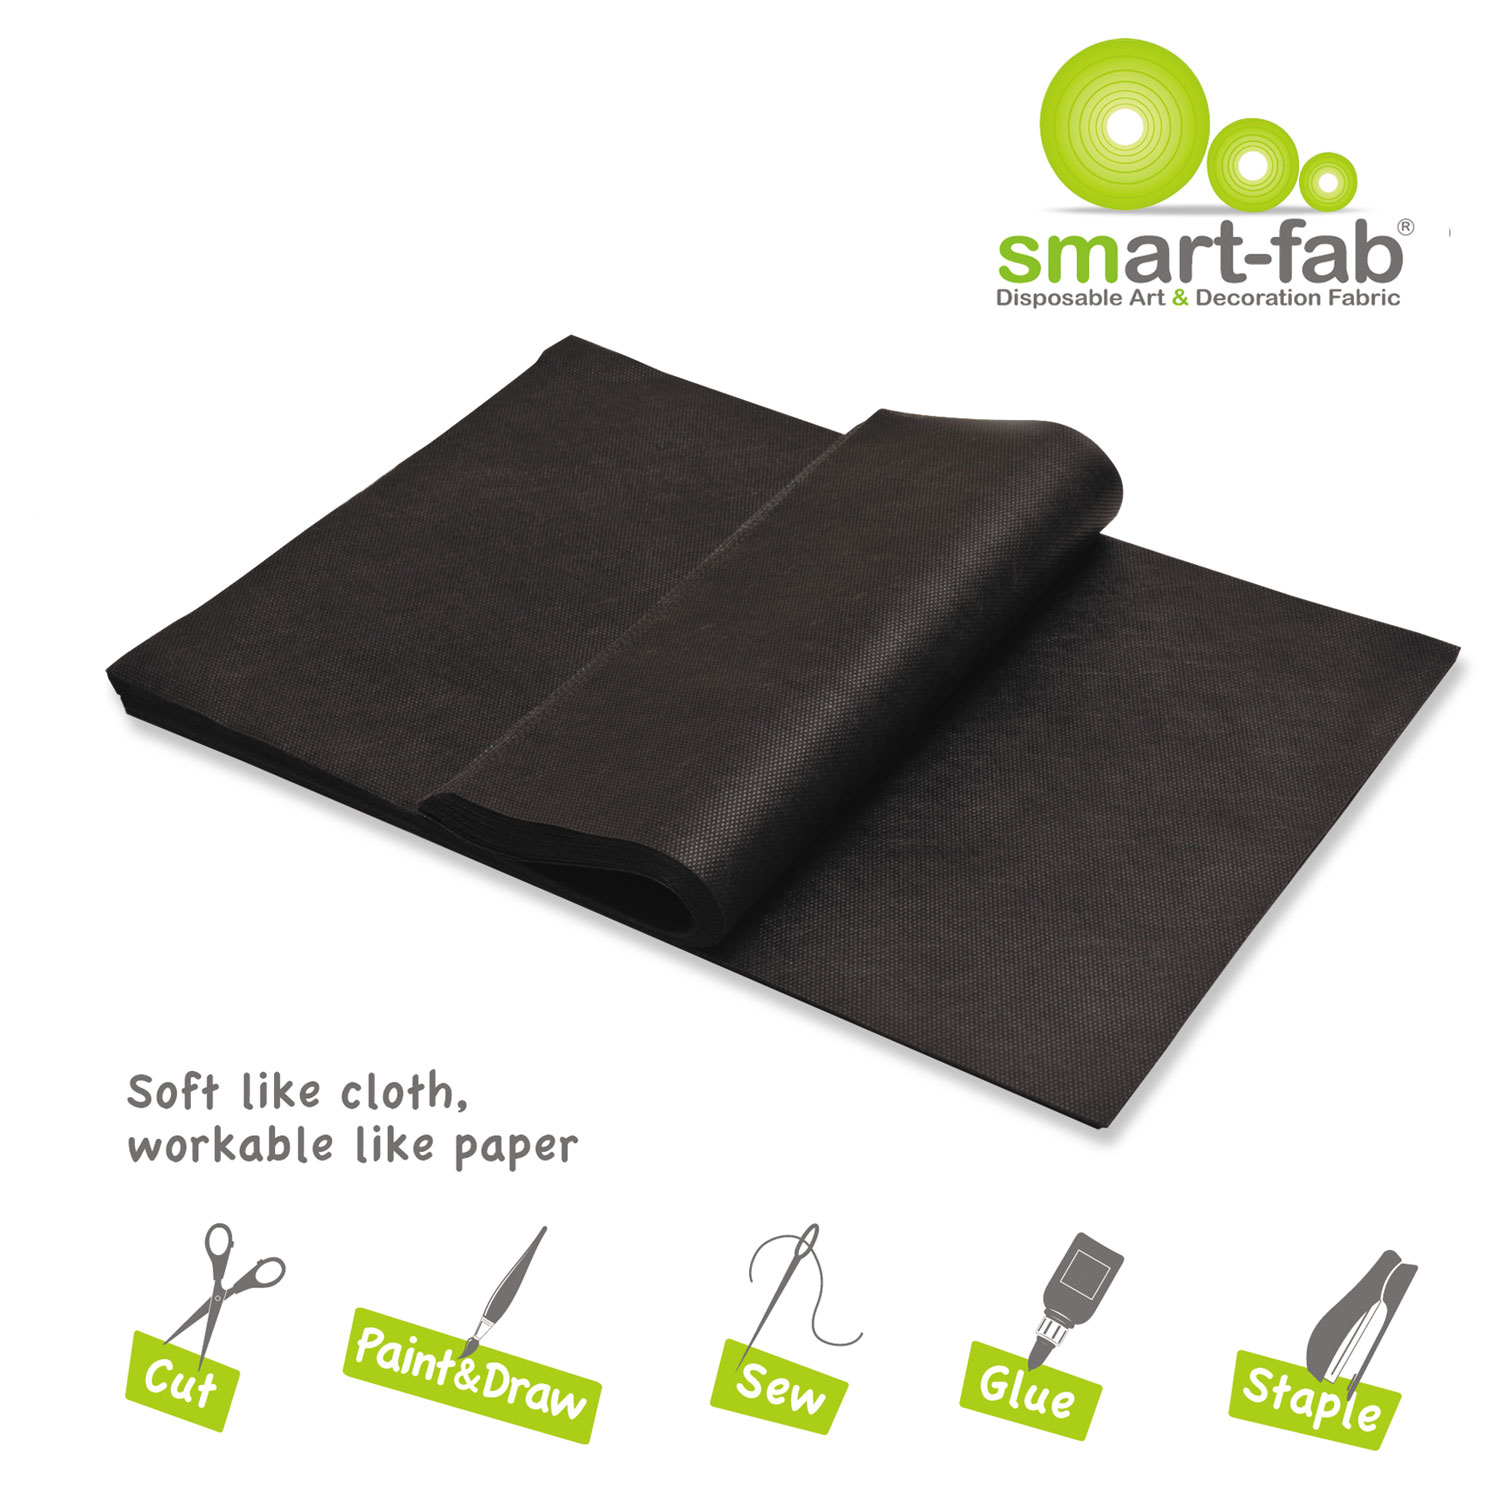 Smart Fab Disposable Fabric, 12 x 18 Sheets, Black, 45 per pack